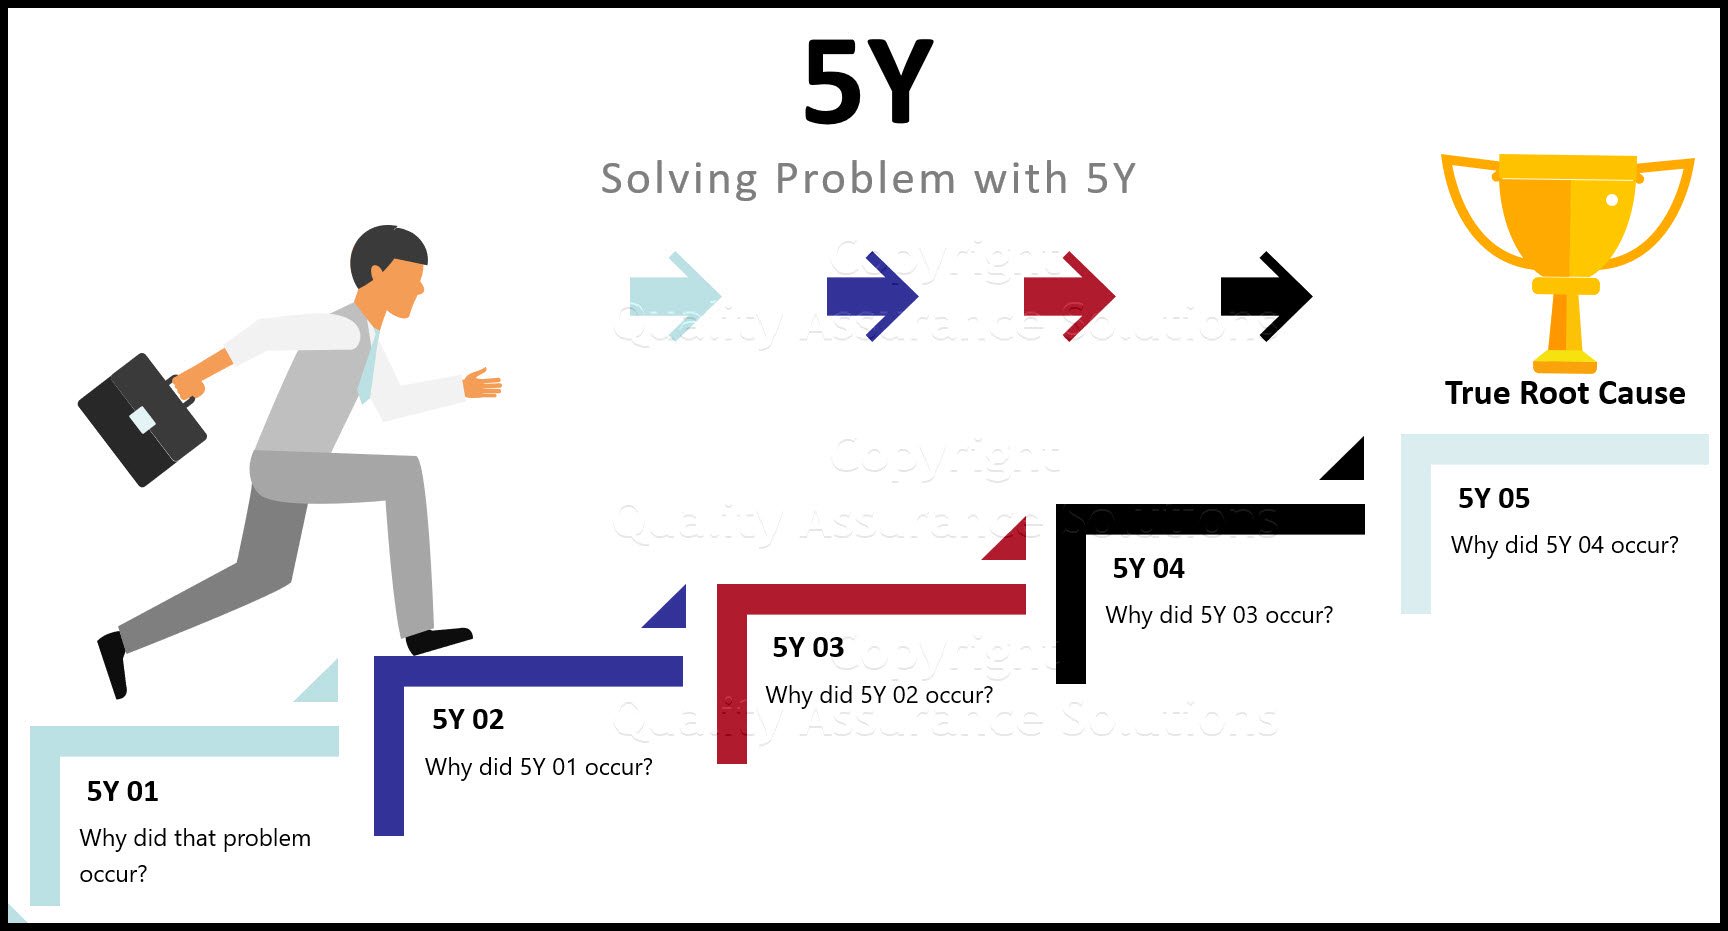 Learn 5 why problem solving and how this connects to 8D problem solving. See how to use 5Y analysis for customer corrective actions.